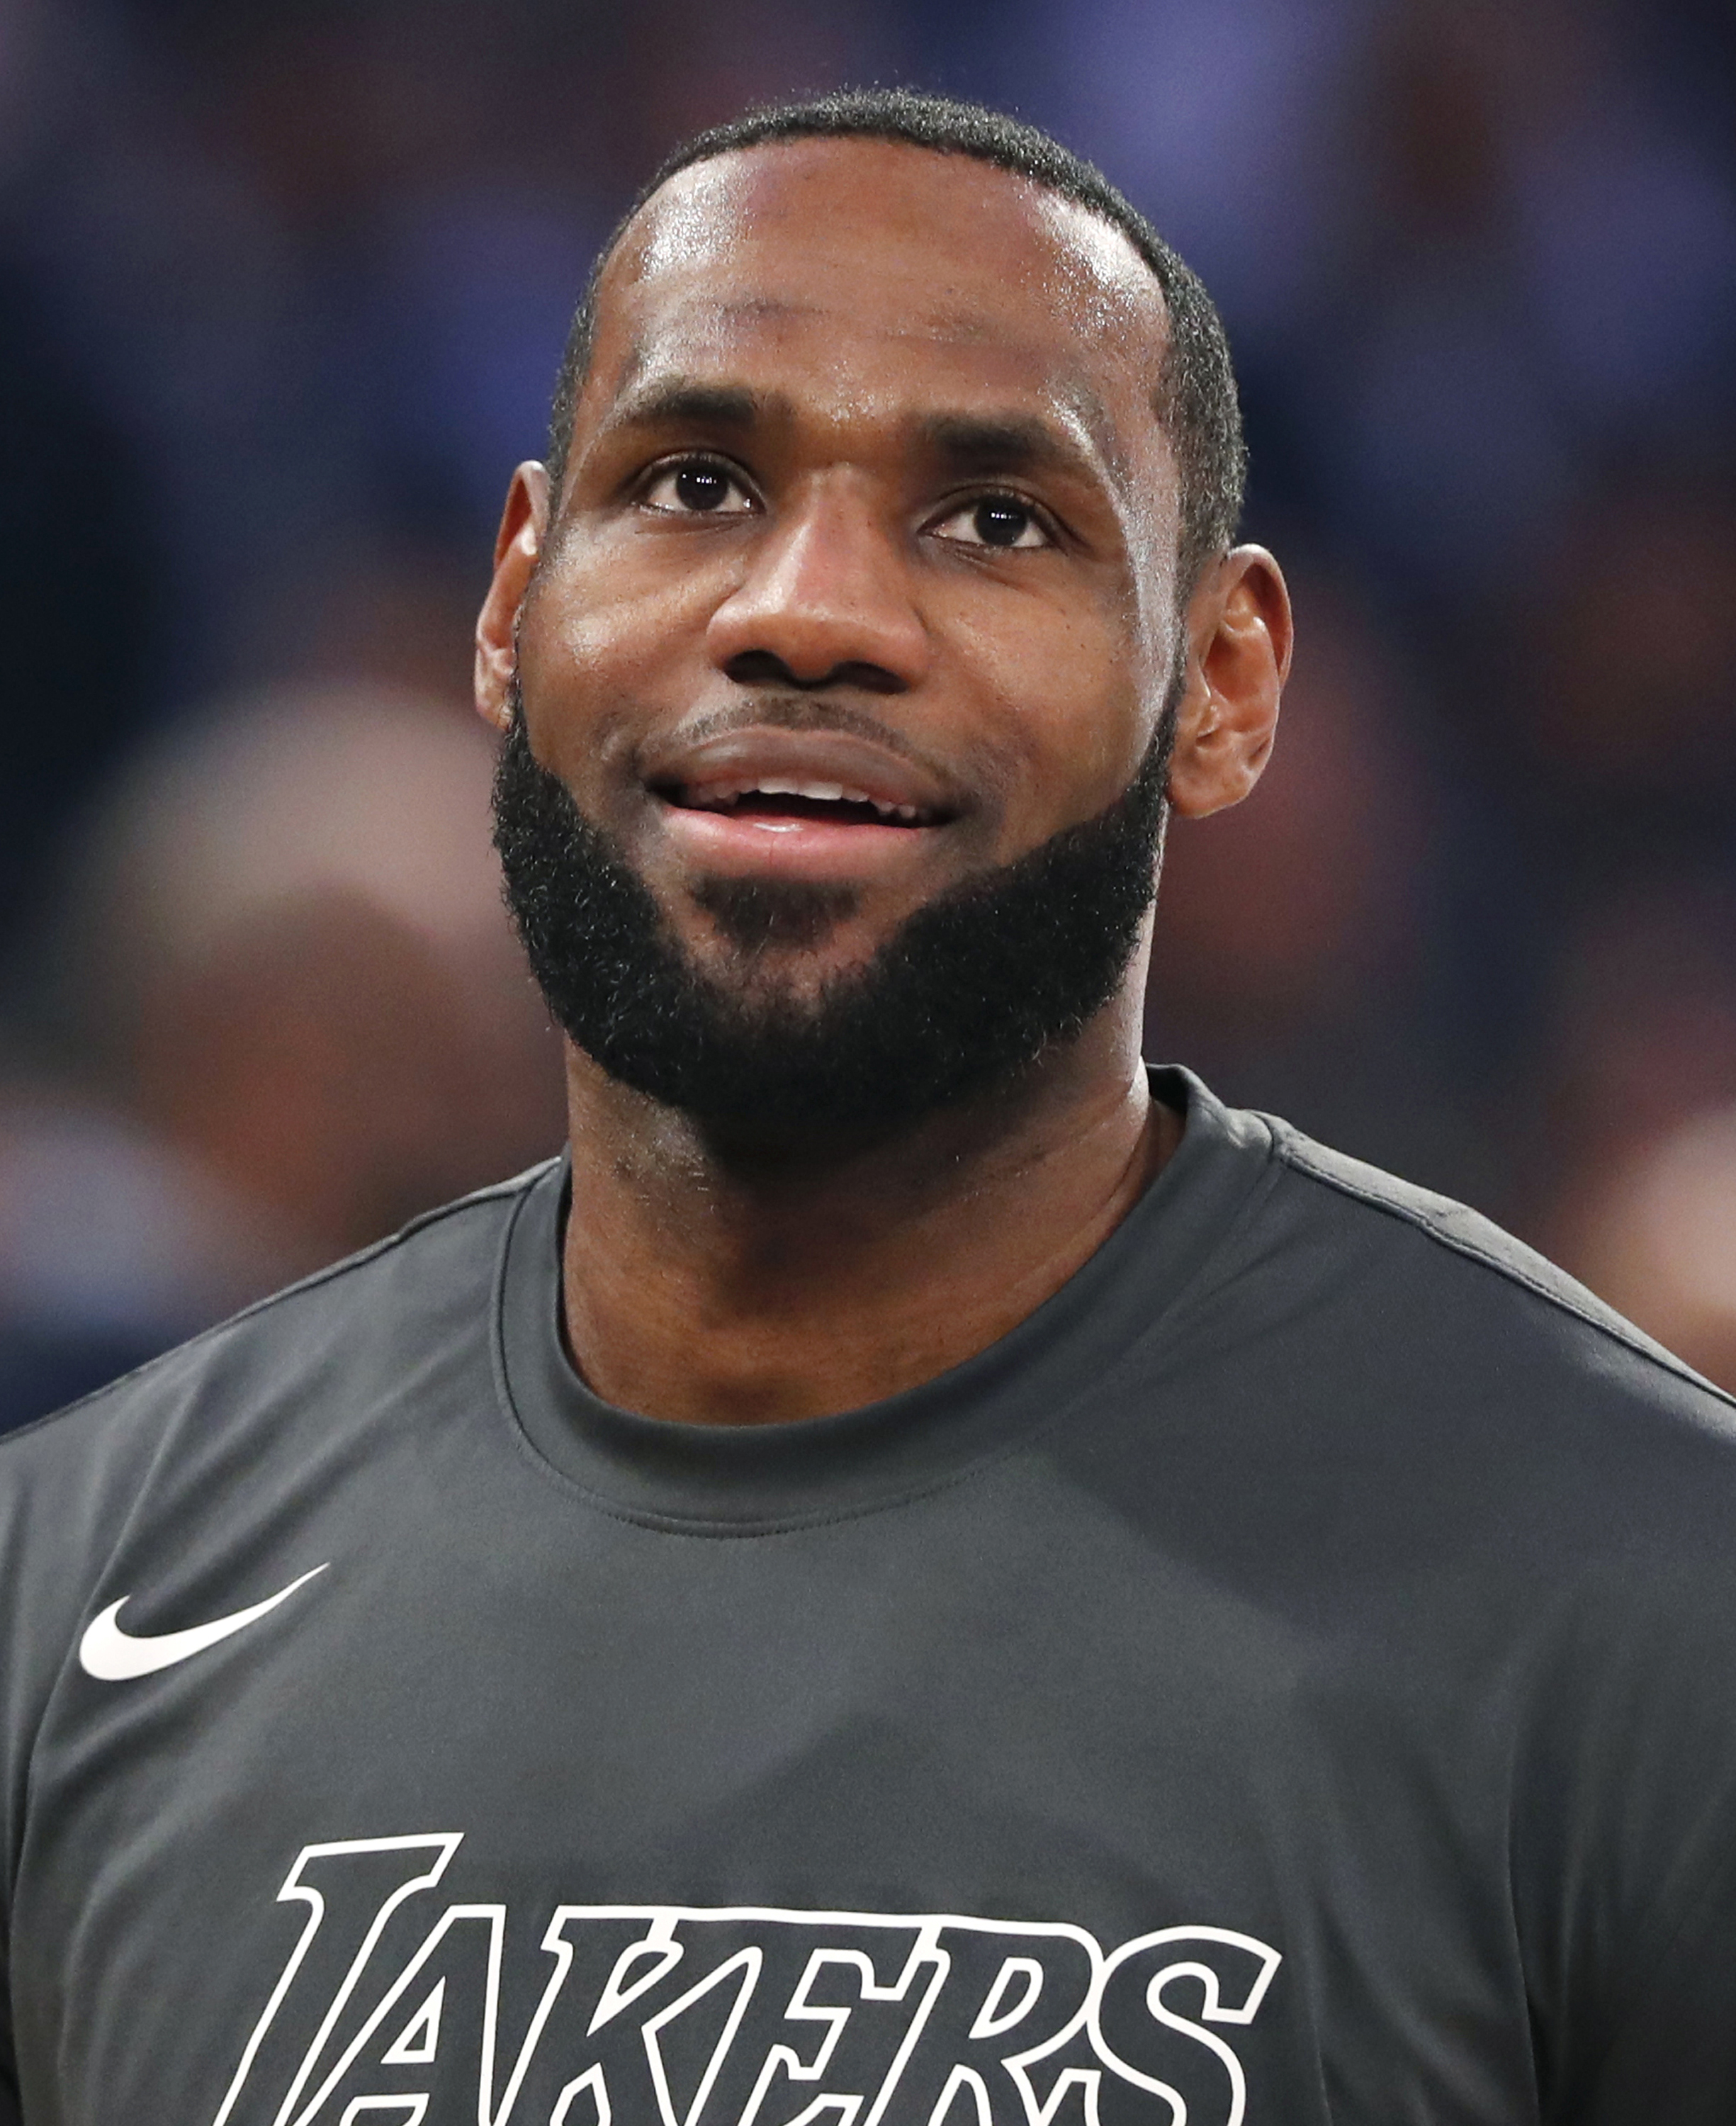 LeBron James considered playing for the Dallas Cowboys during 2011 NBA  lockout 